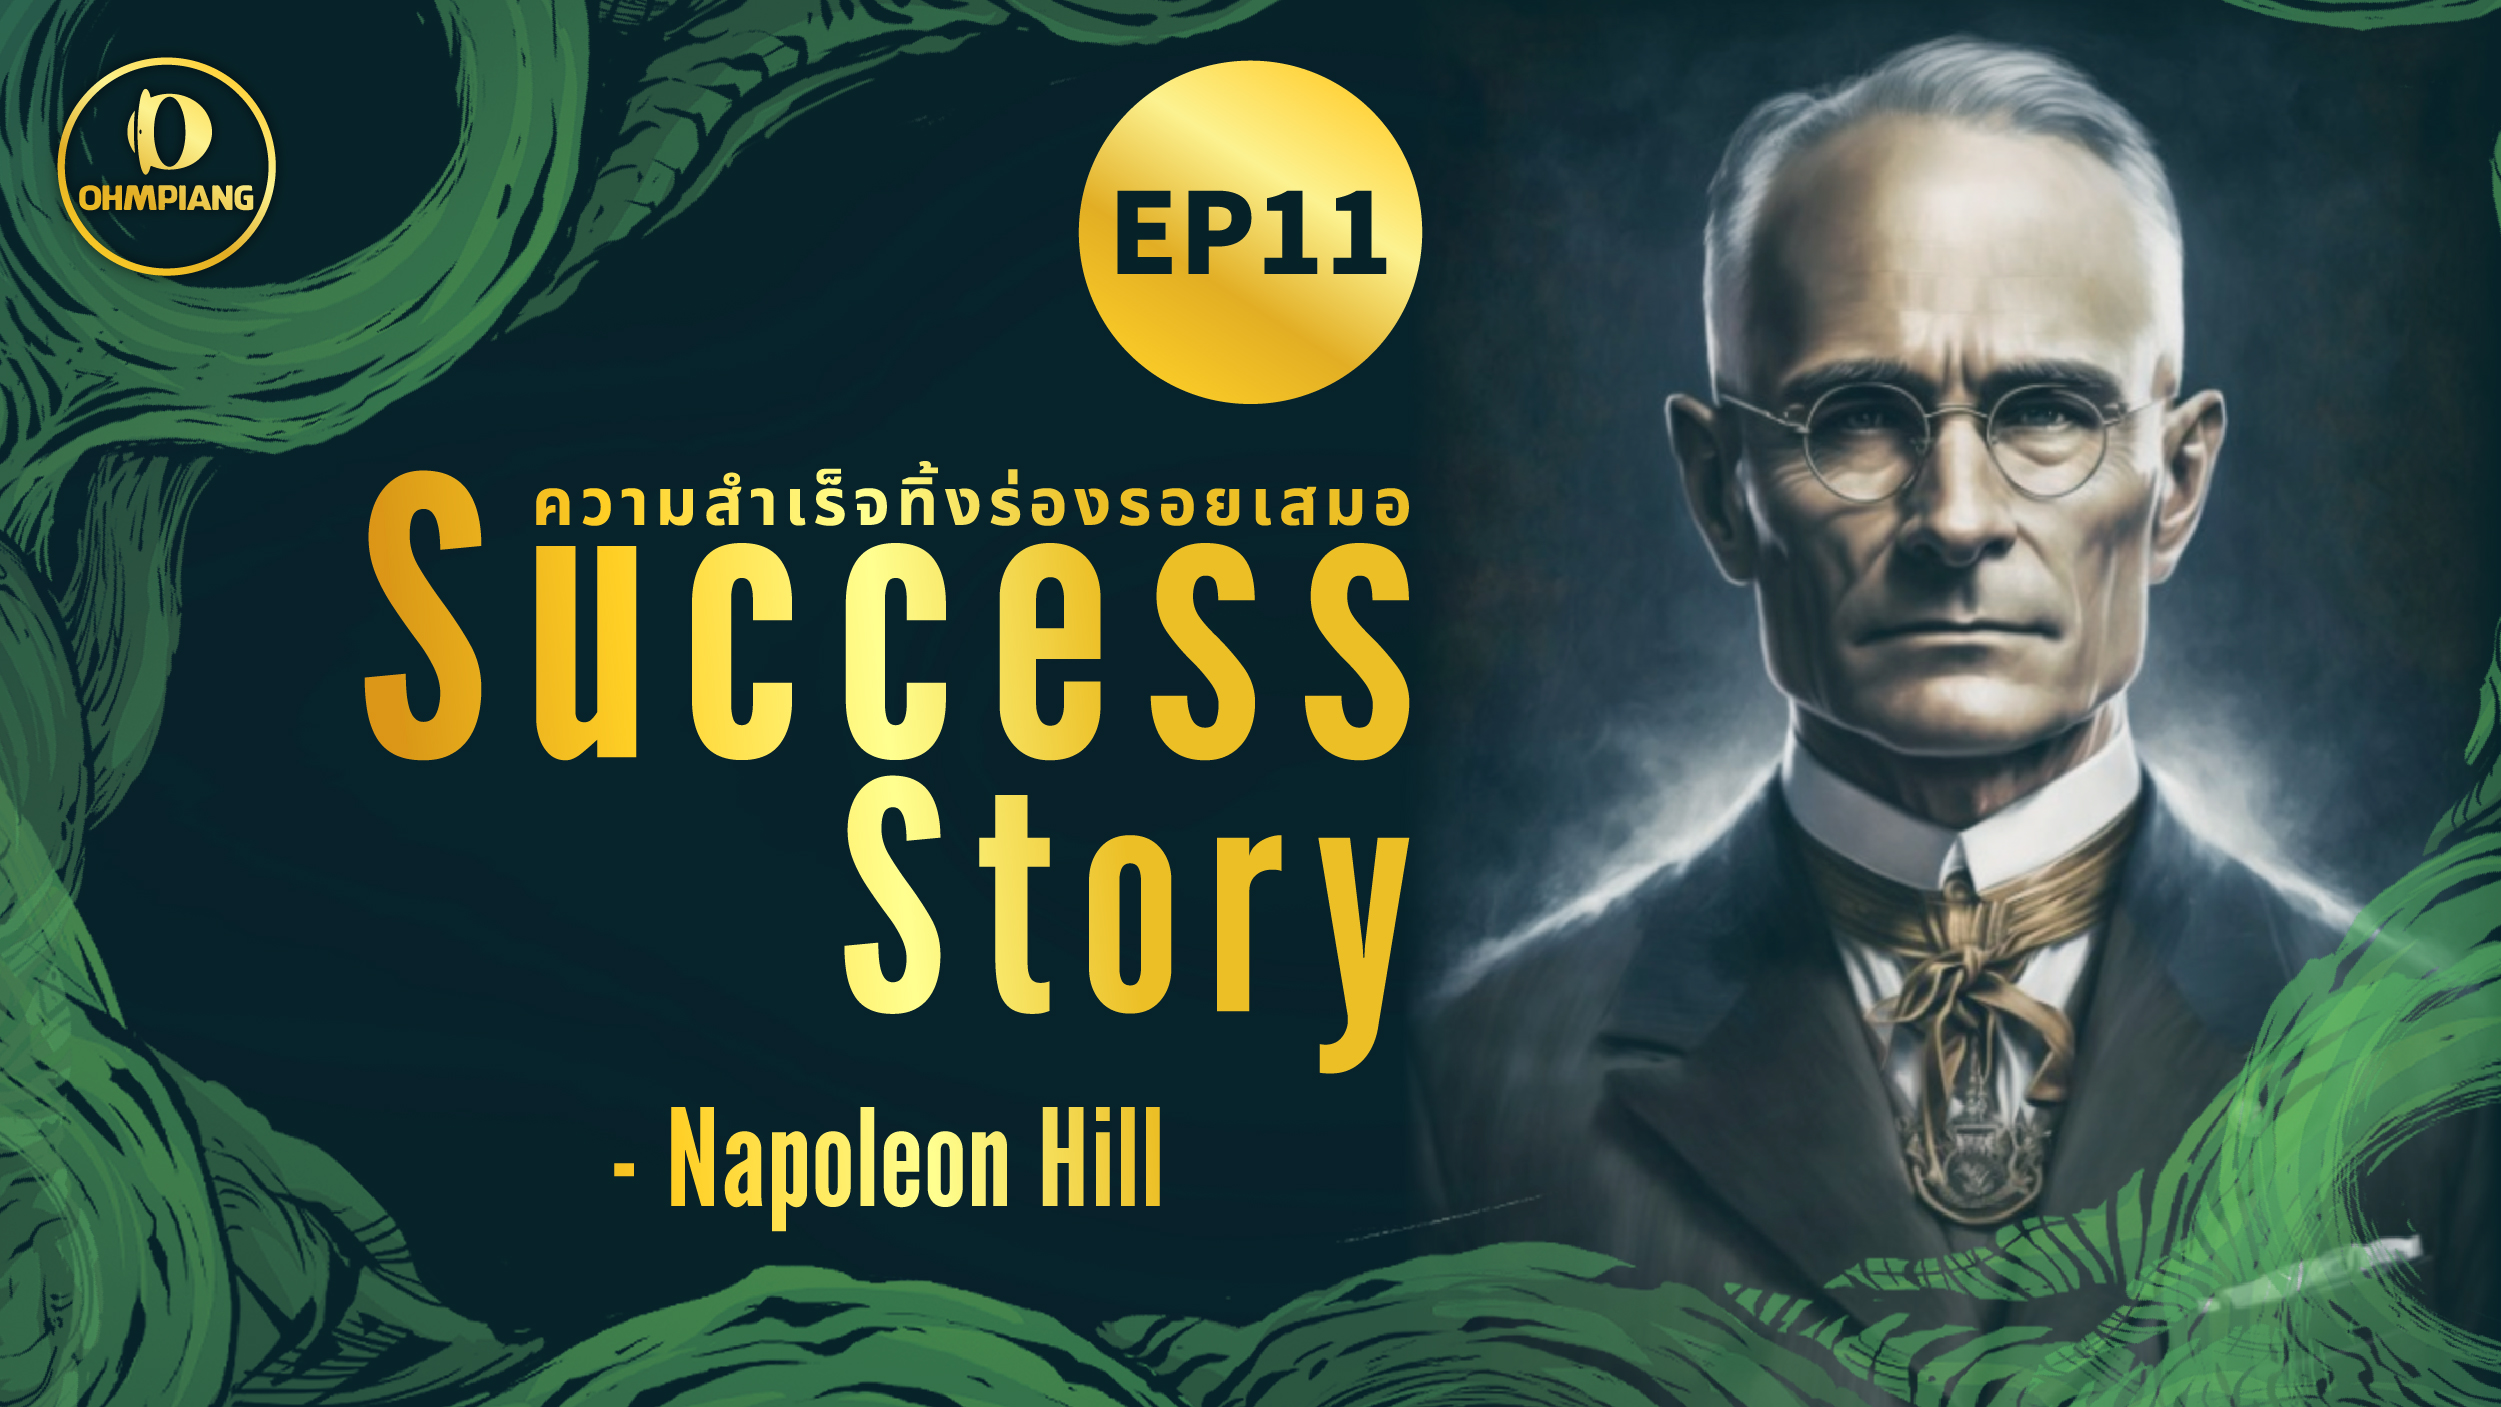 The Story of Napoleon Hill